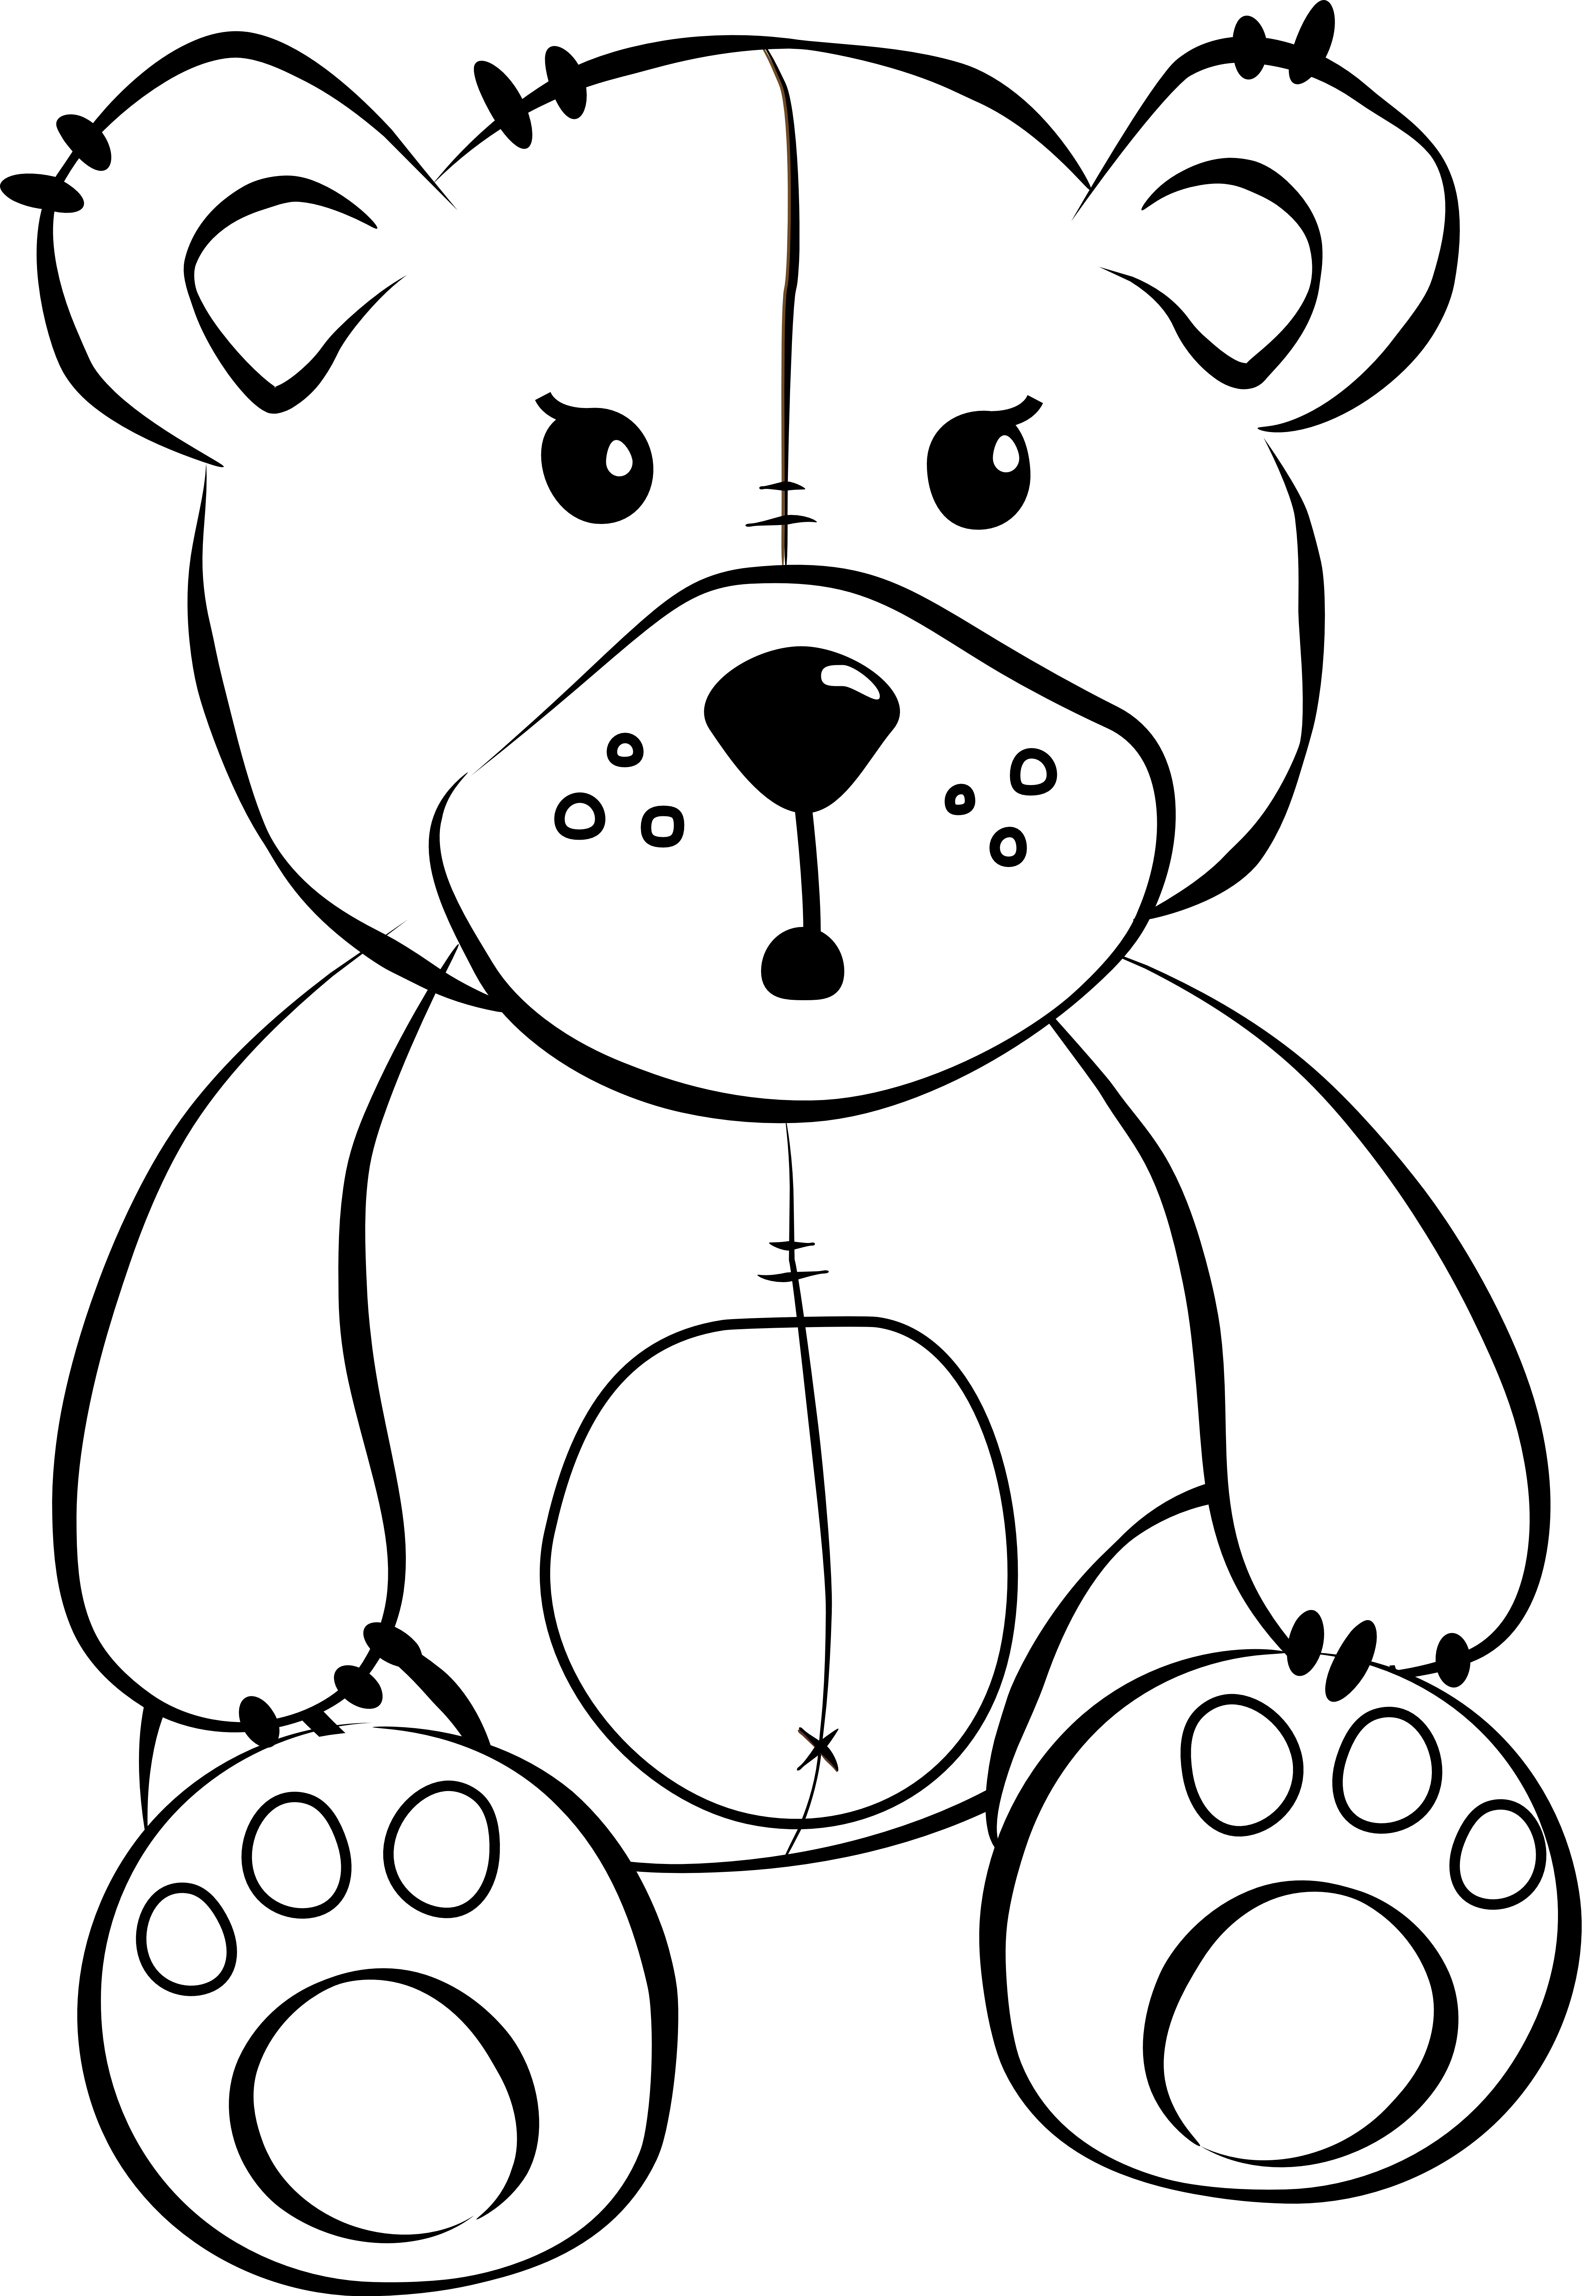 Free Bear Cartoon Images, Download Free Bear Cartoon Images png images